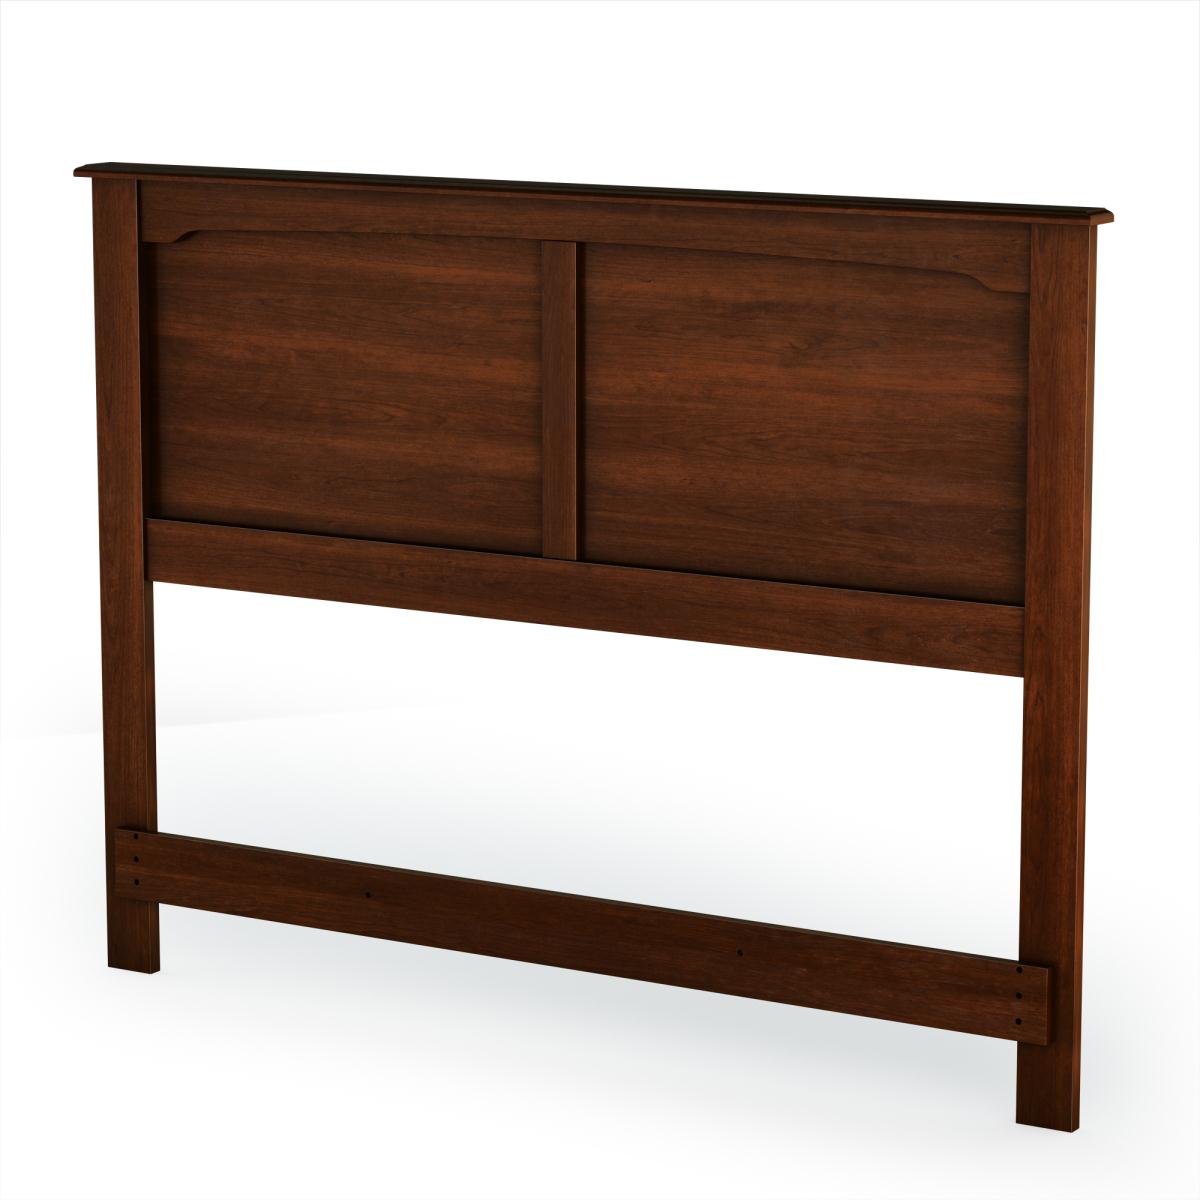 South Shore Willow Full Headboard - Sumptuous Cherry